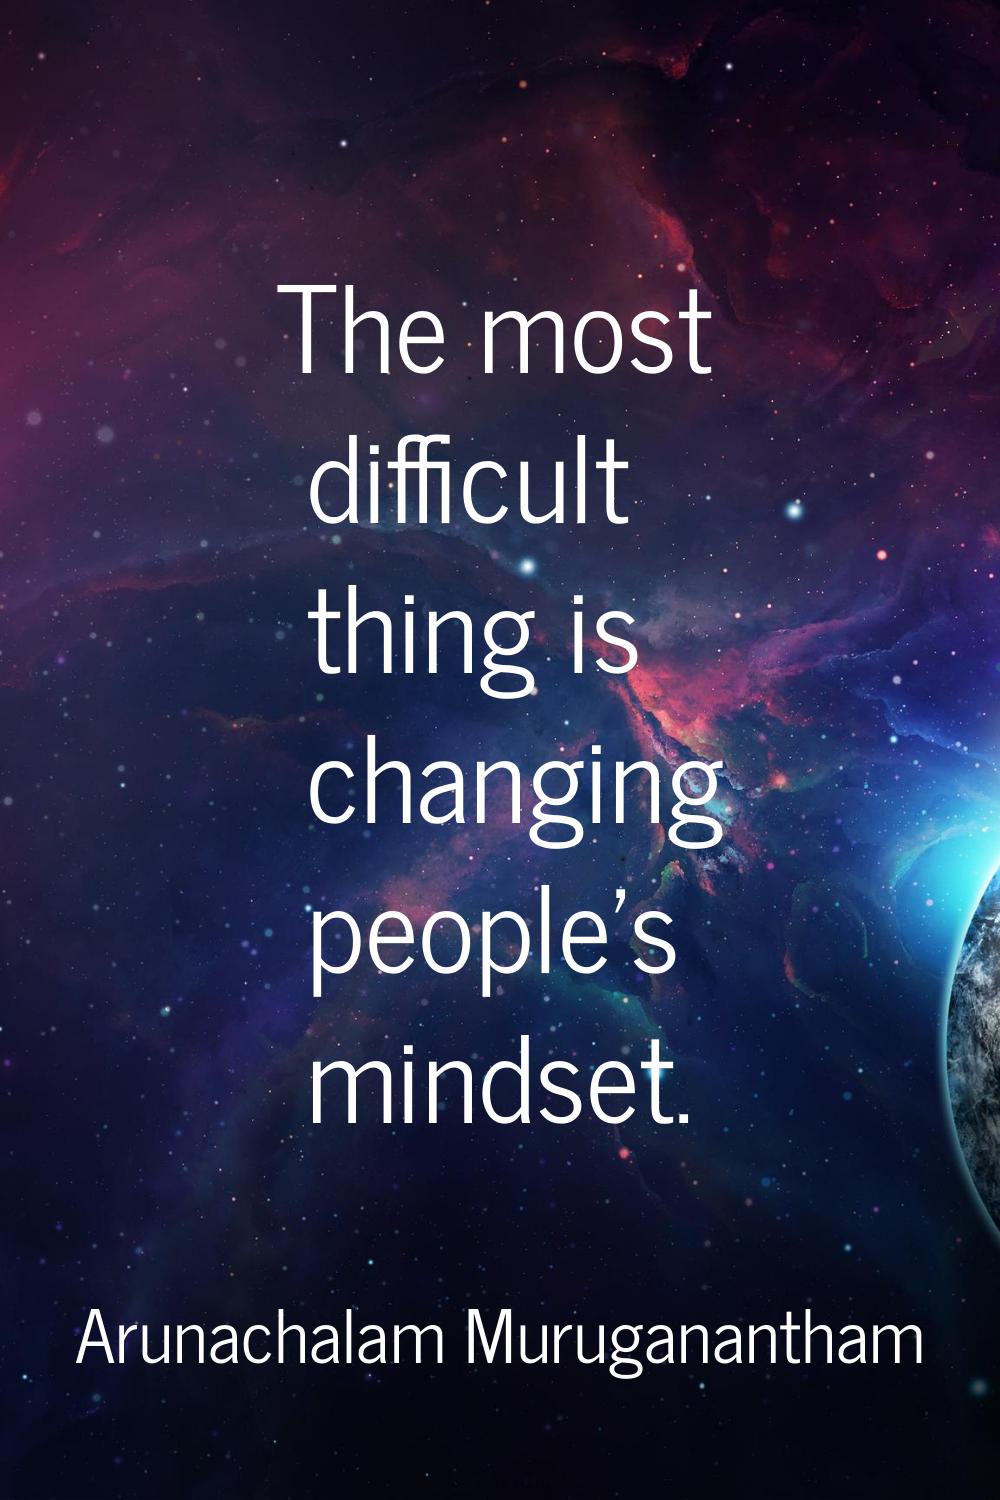 The most difficult thing is changing people's mindset.